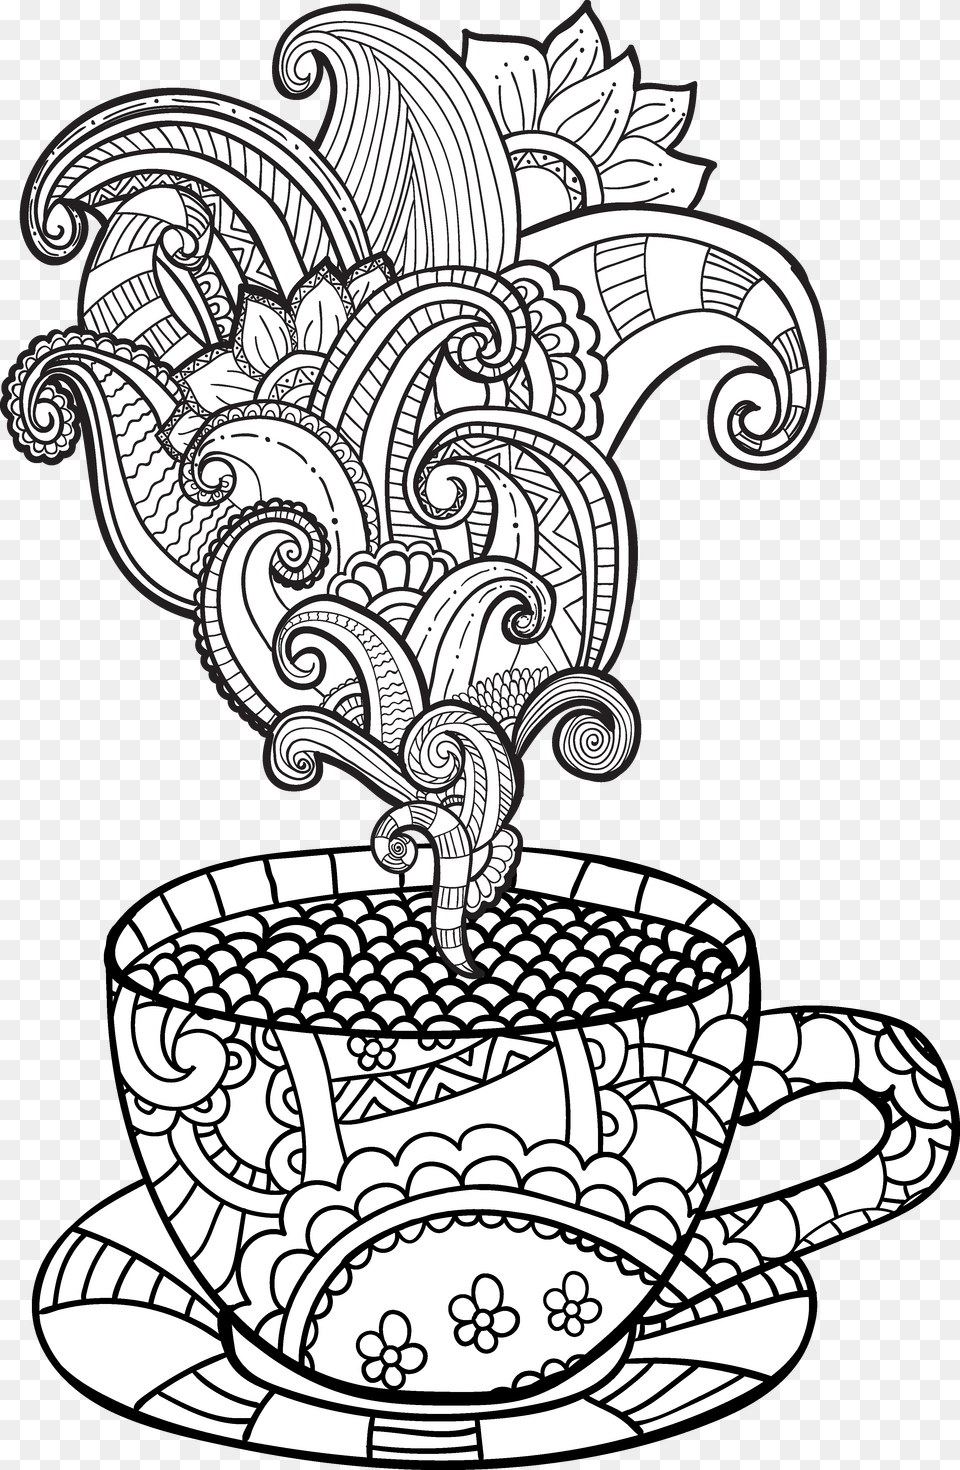 Drawn Tea Cup Transparent Coffee Coloring Pages For Adults, Art, Pottery, Bulldozer, Machine Png Image